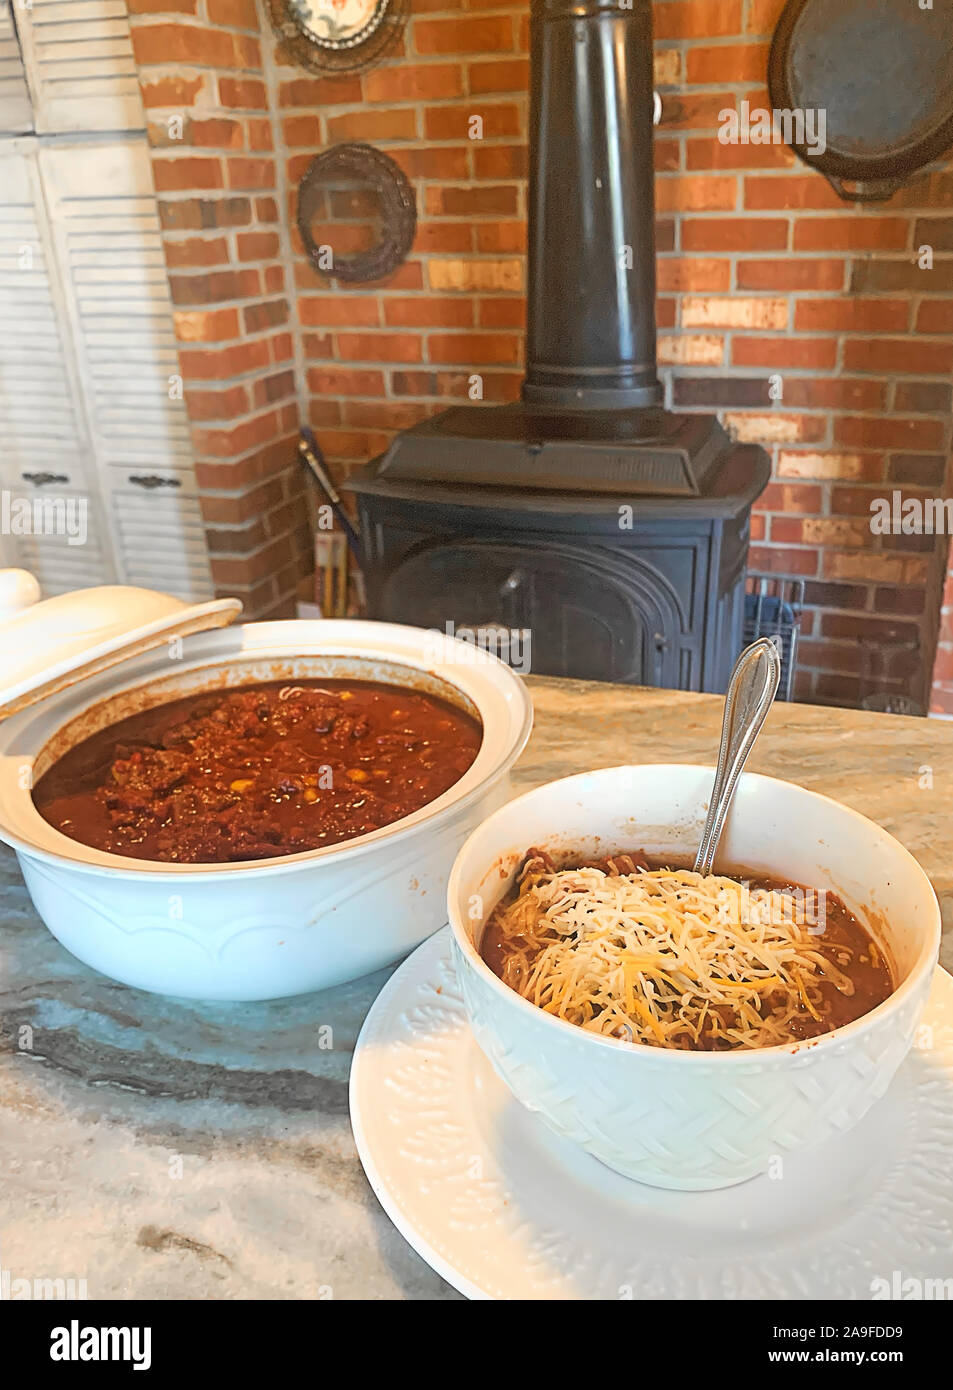 Warm and cozy image of a serving dish filled with chili and also a bowl of Chili with Shredded Cheese.  View of Kitchen's wood burning stove in backgr Stock Photo